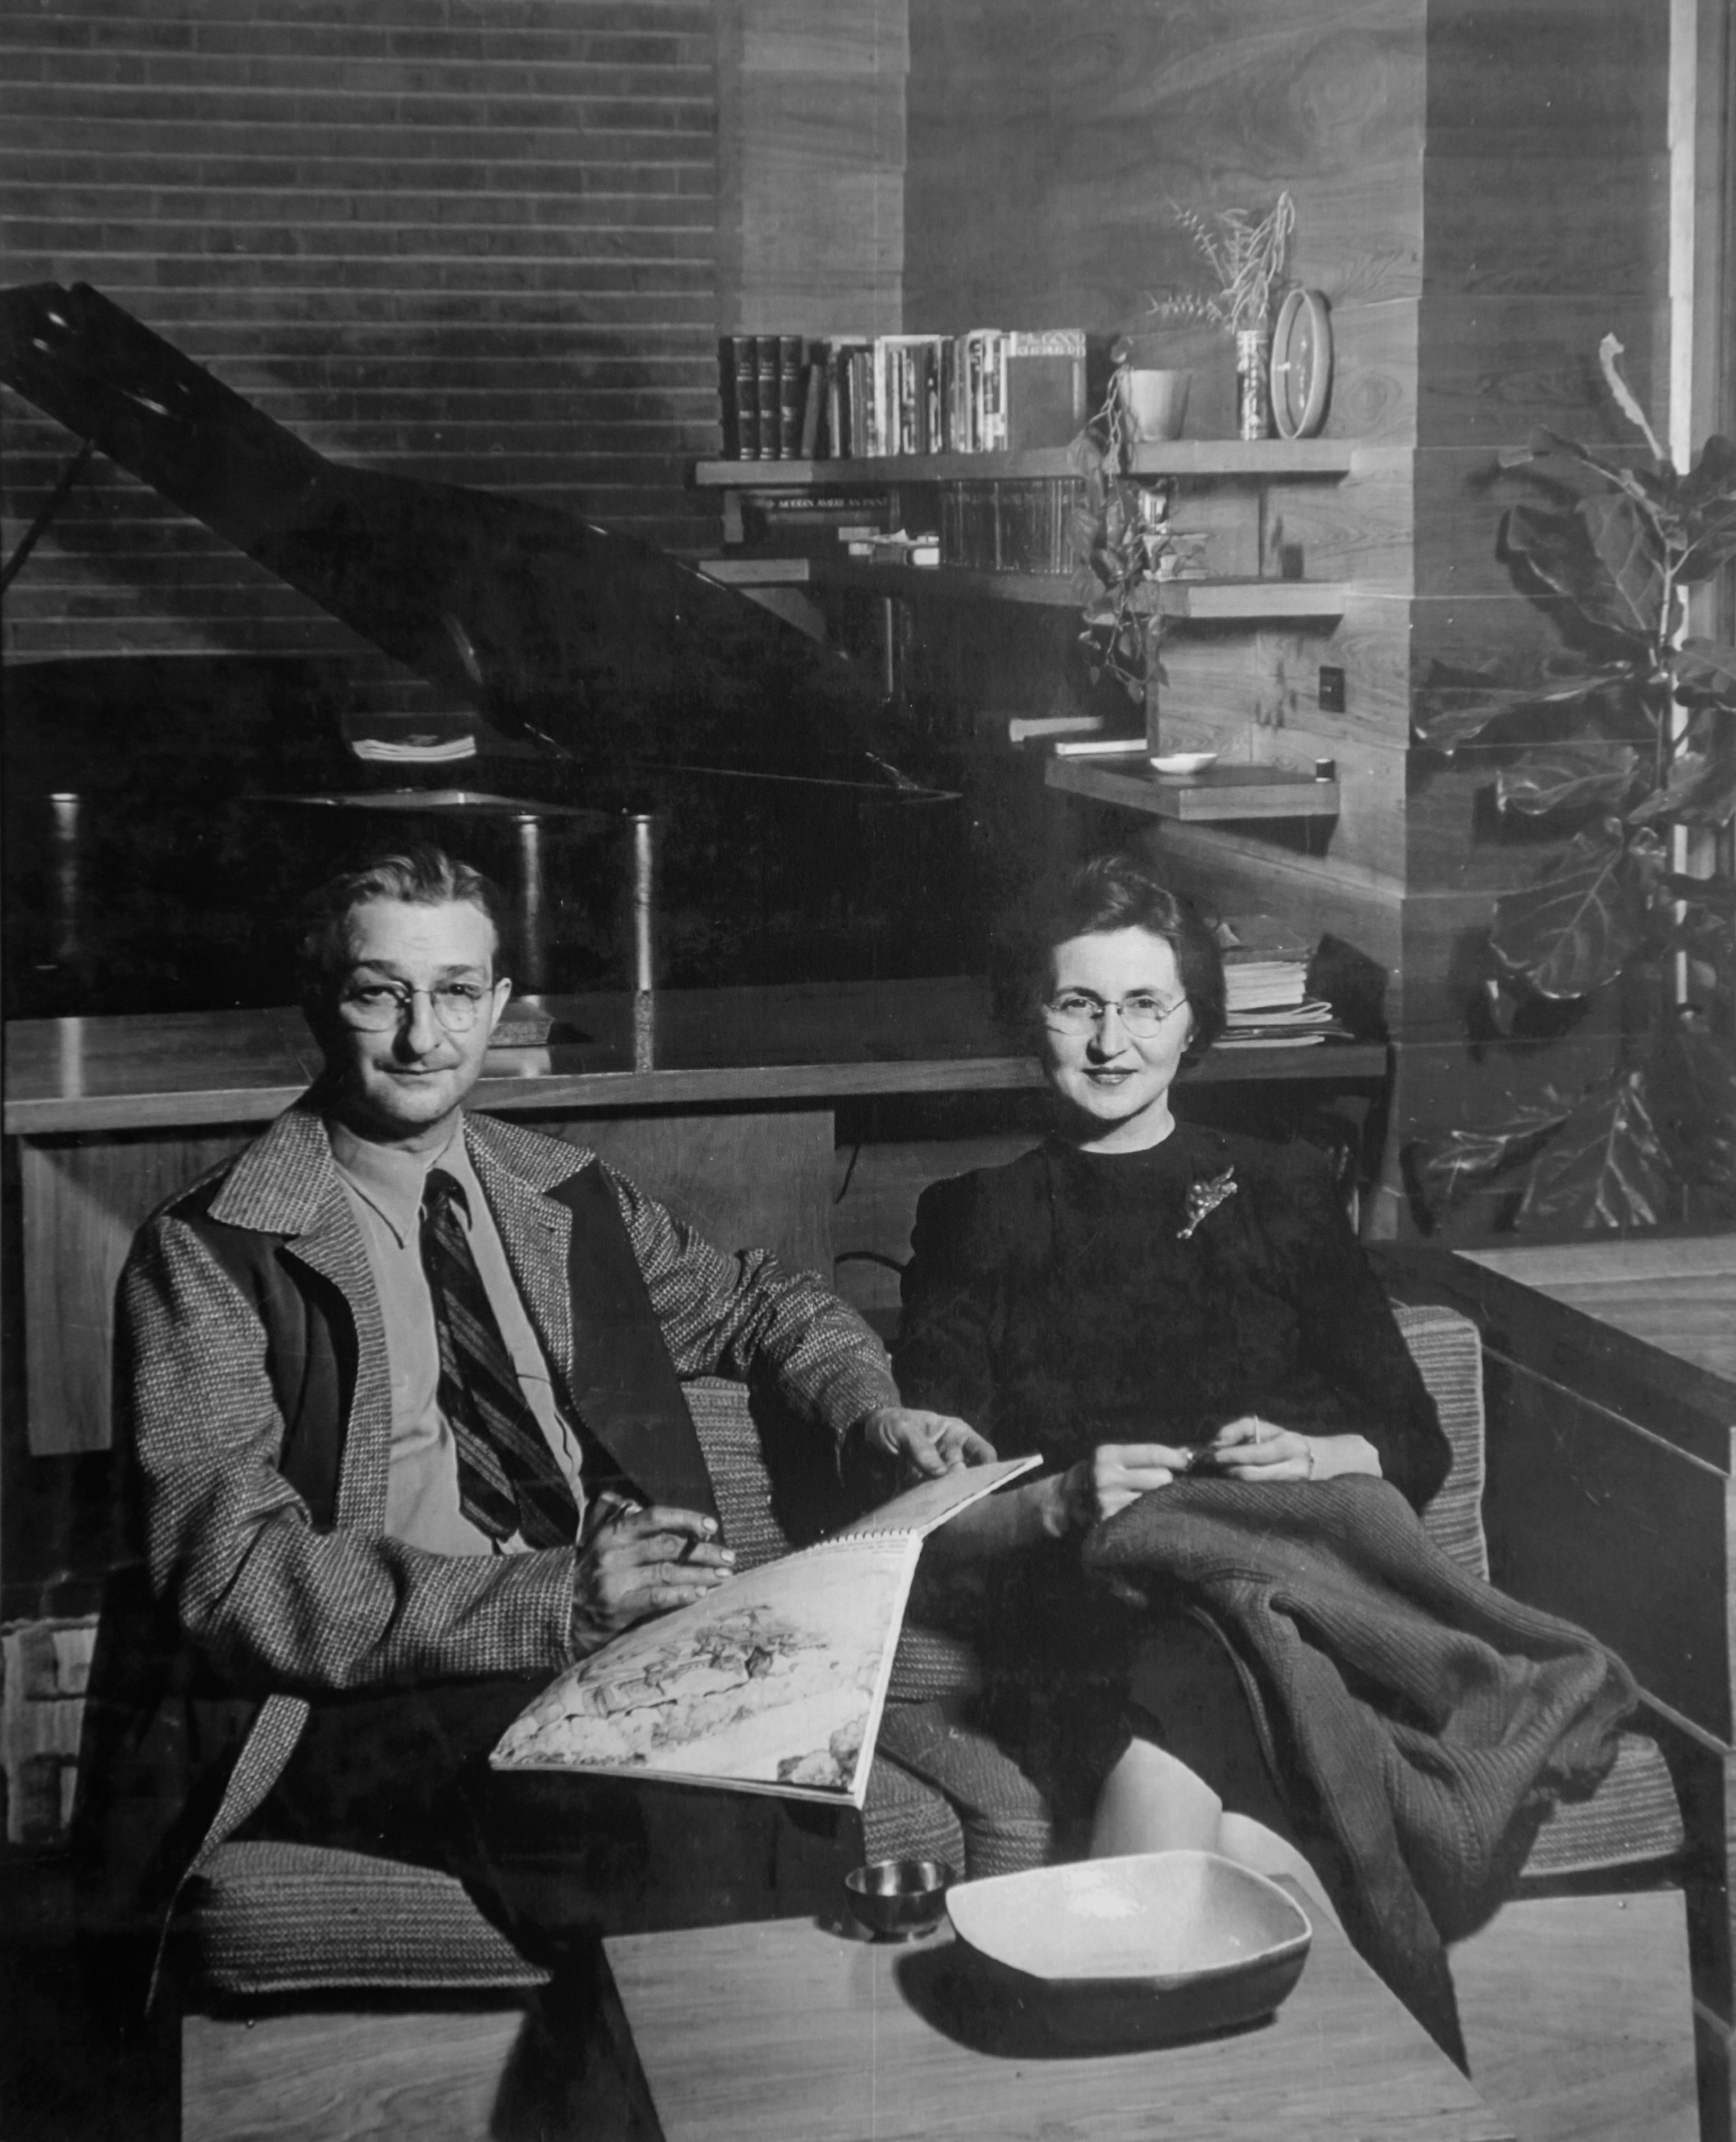 An undated photograph shows Gregor, a chemical engineer who developed a fast drying paint for the auto industry, and his wife Elizabeth Affleck sitting in the main living area of their home. " He loved that house until the day he died and was very, very proud of it, " said Dale Gyure, an architectural historian at Lawrence Technological University in Southfield.